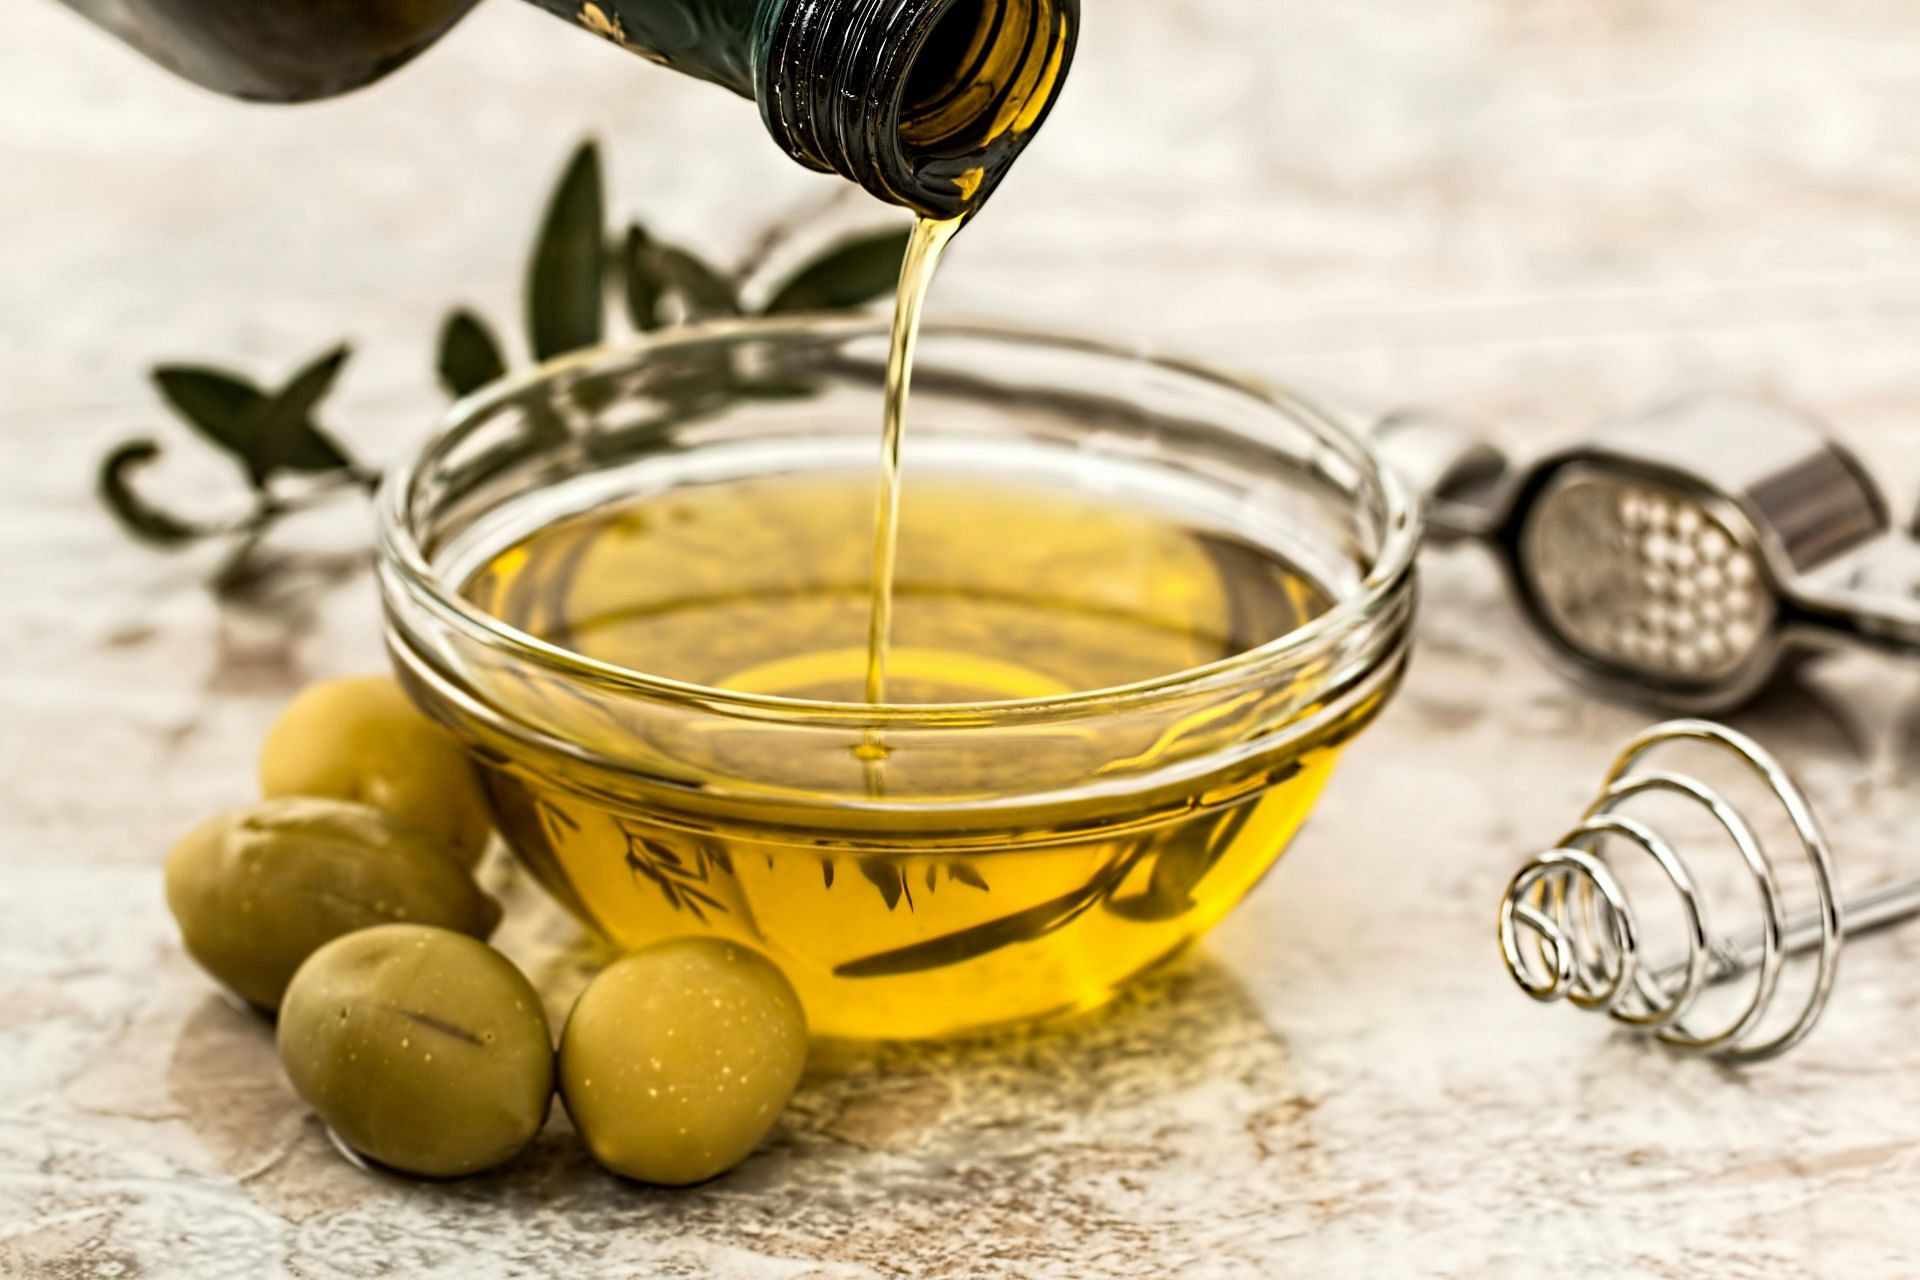 benefits of olive oil (Image sourced via Pexels / Photo by Pixabay)